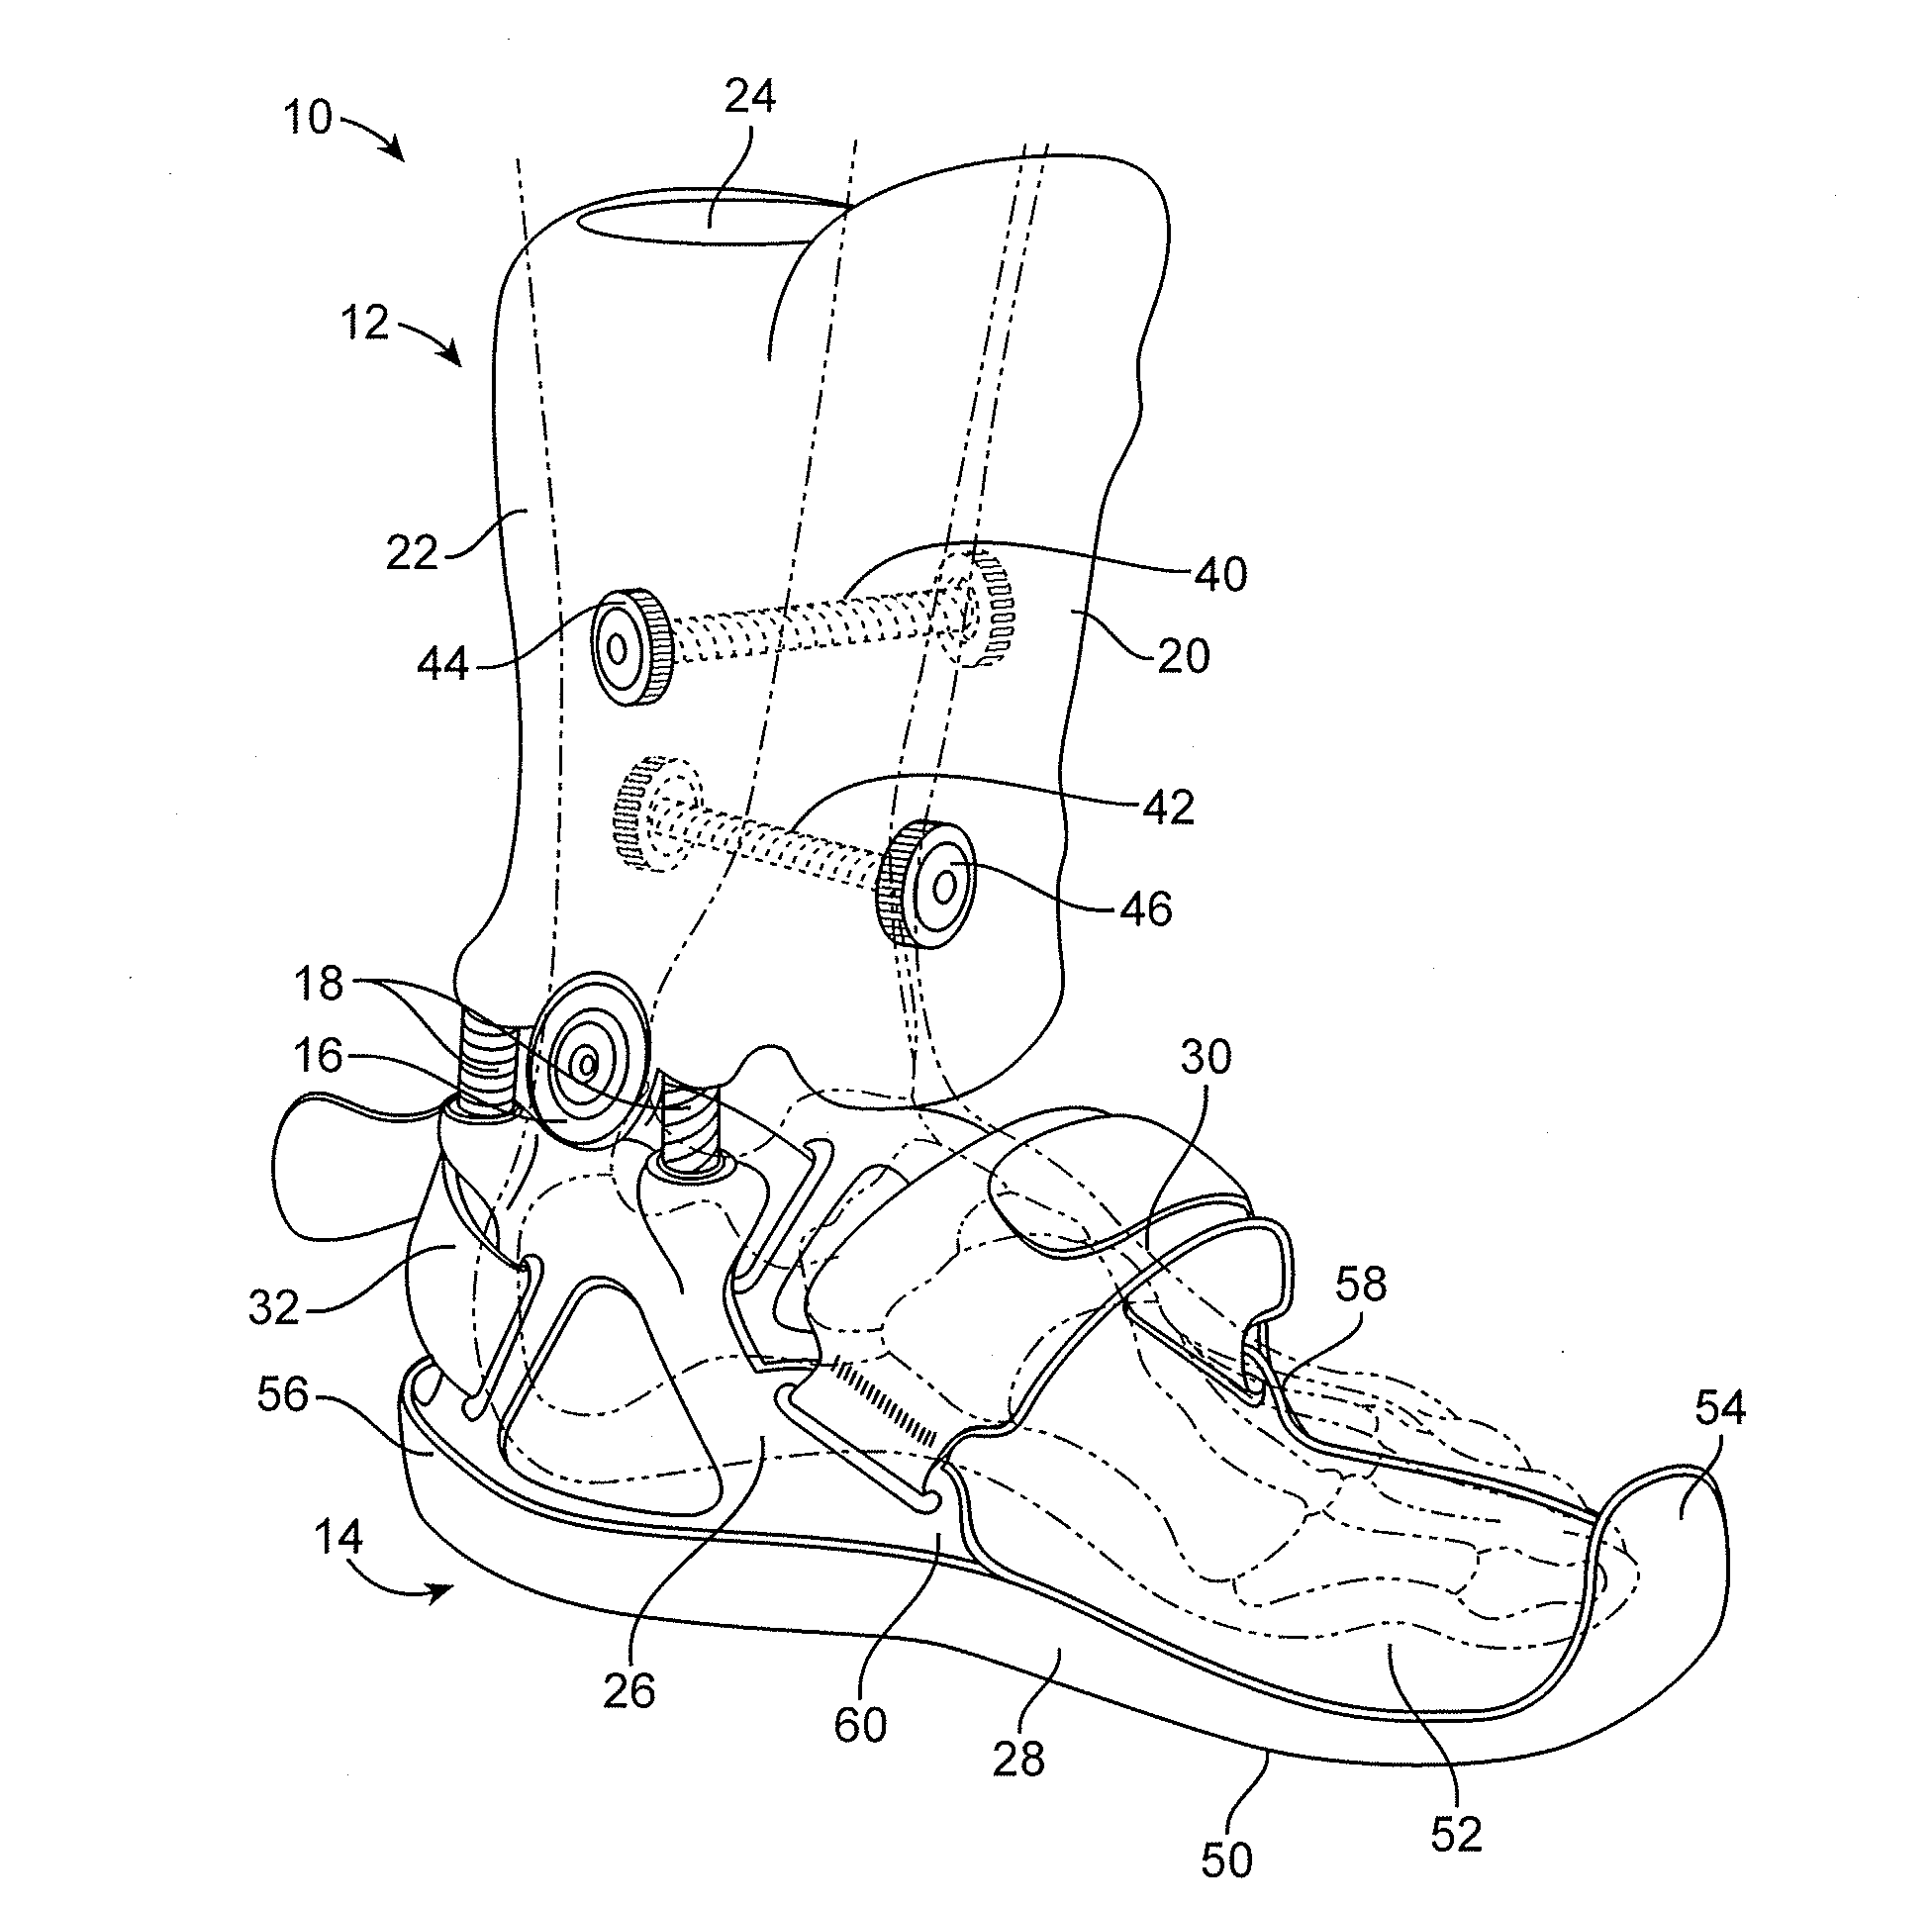 External ankle distraction and load bypassing system and method